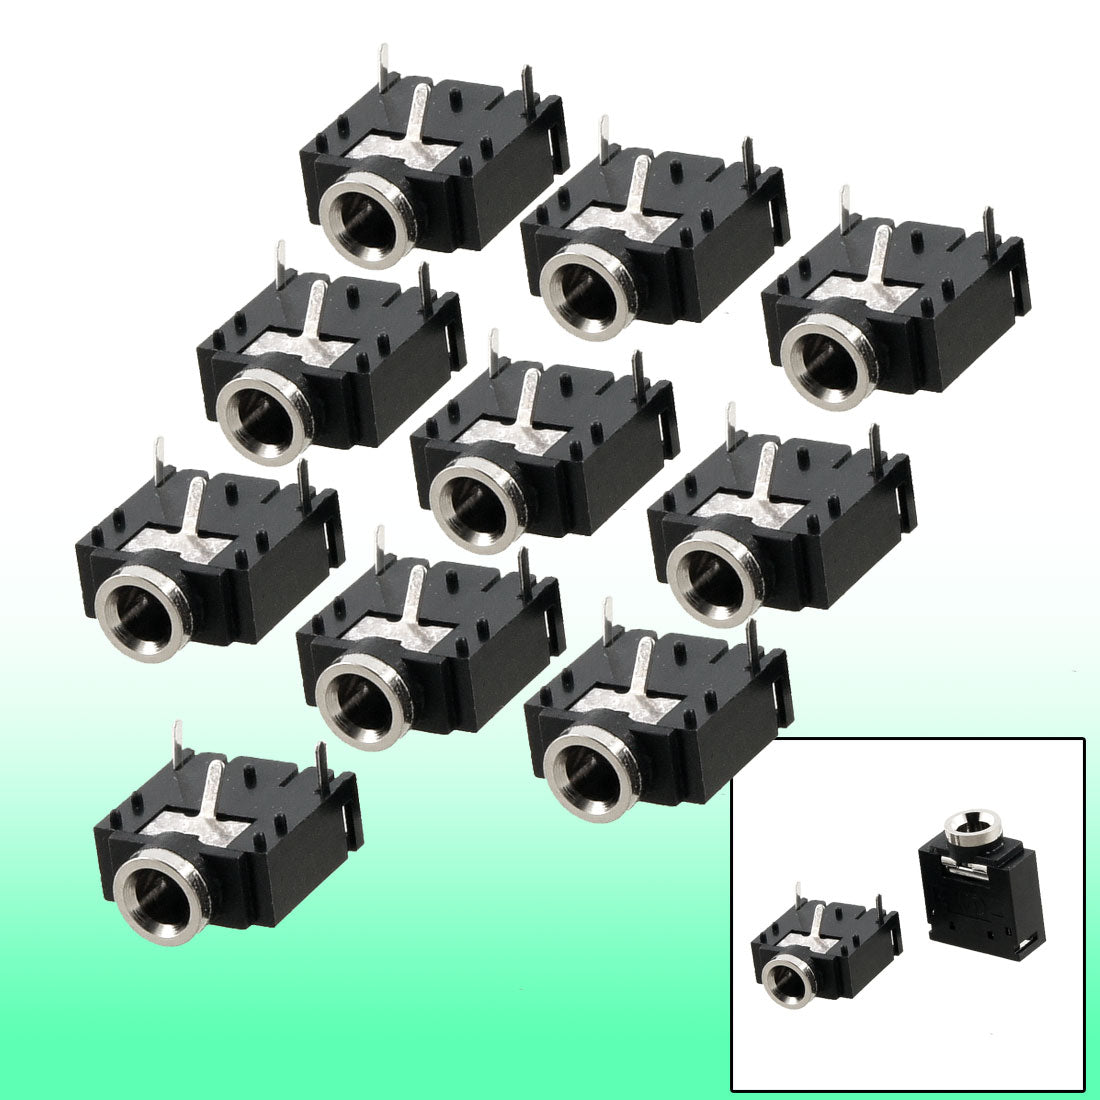 uxcell Uxcell 10 Pcs 3 Terminal PCB Mount Female 3.5mm Stereo Jack Socket Connector